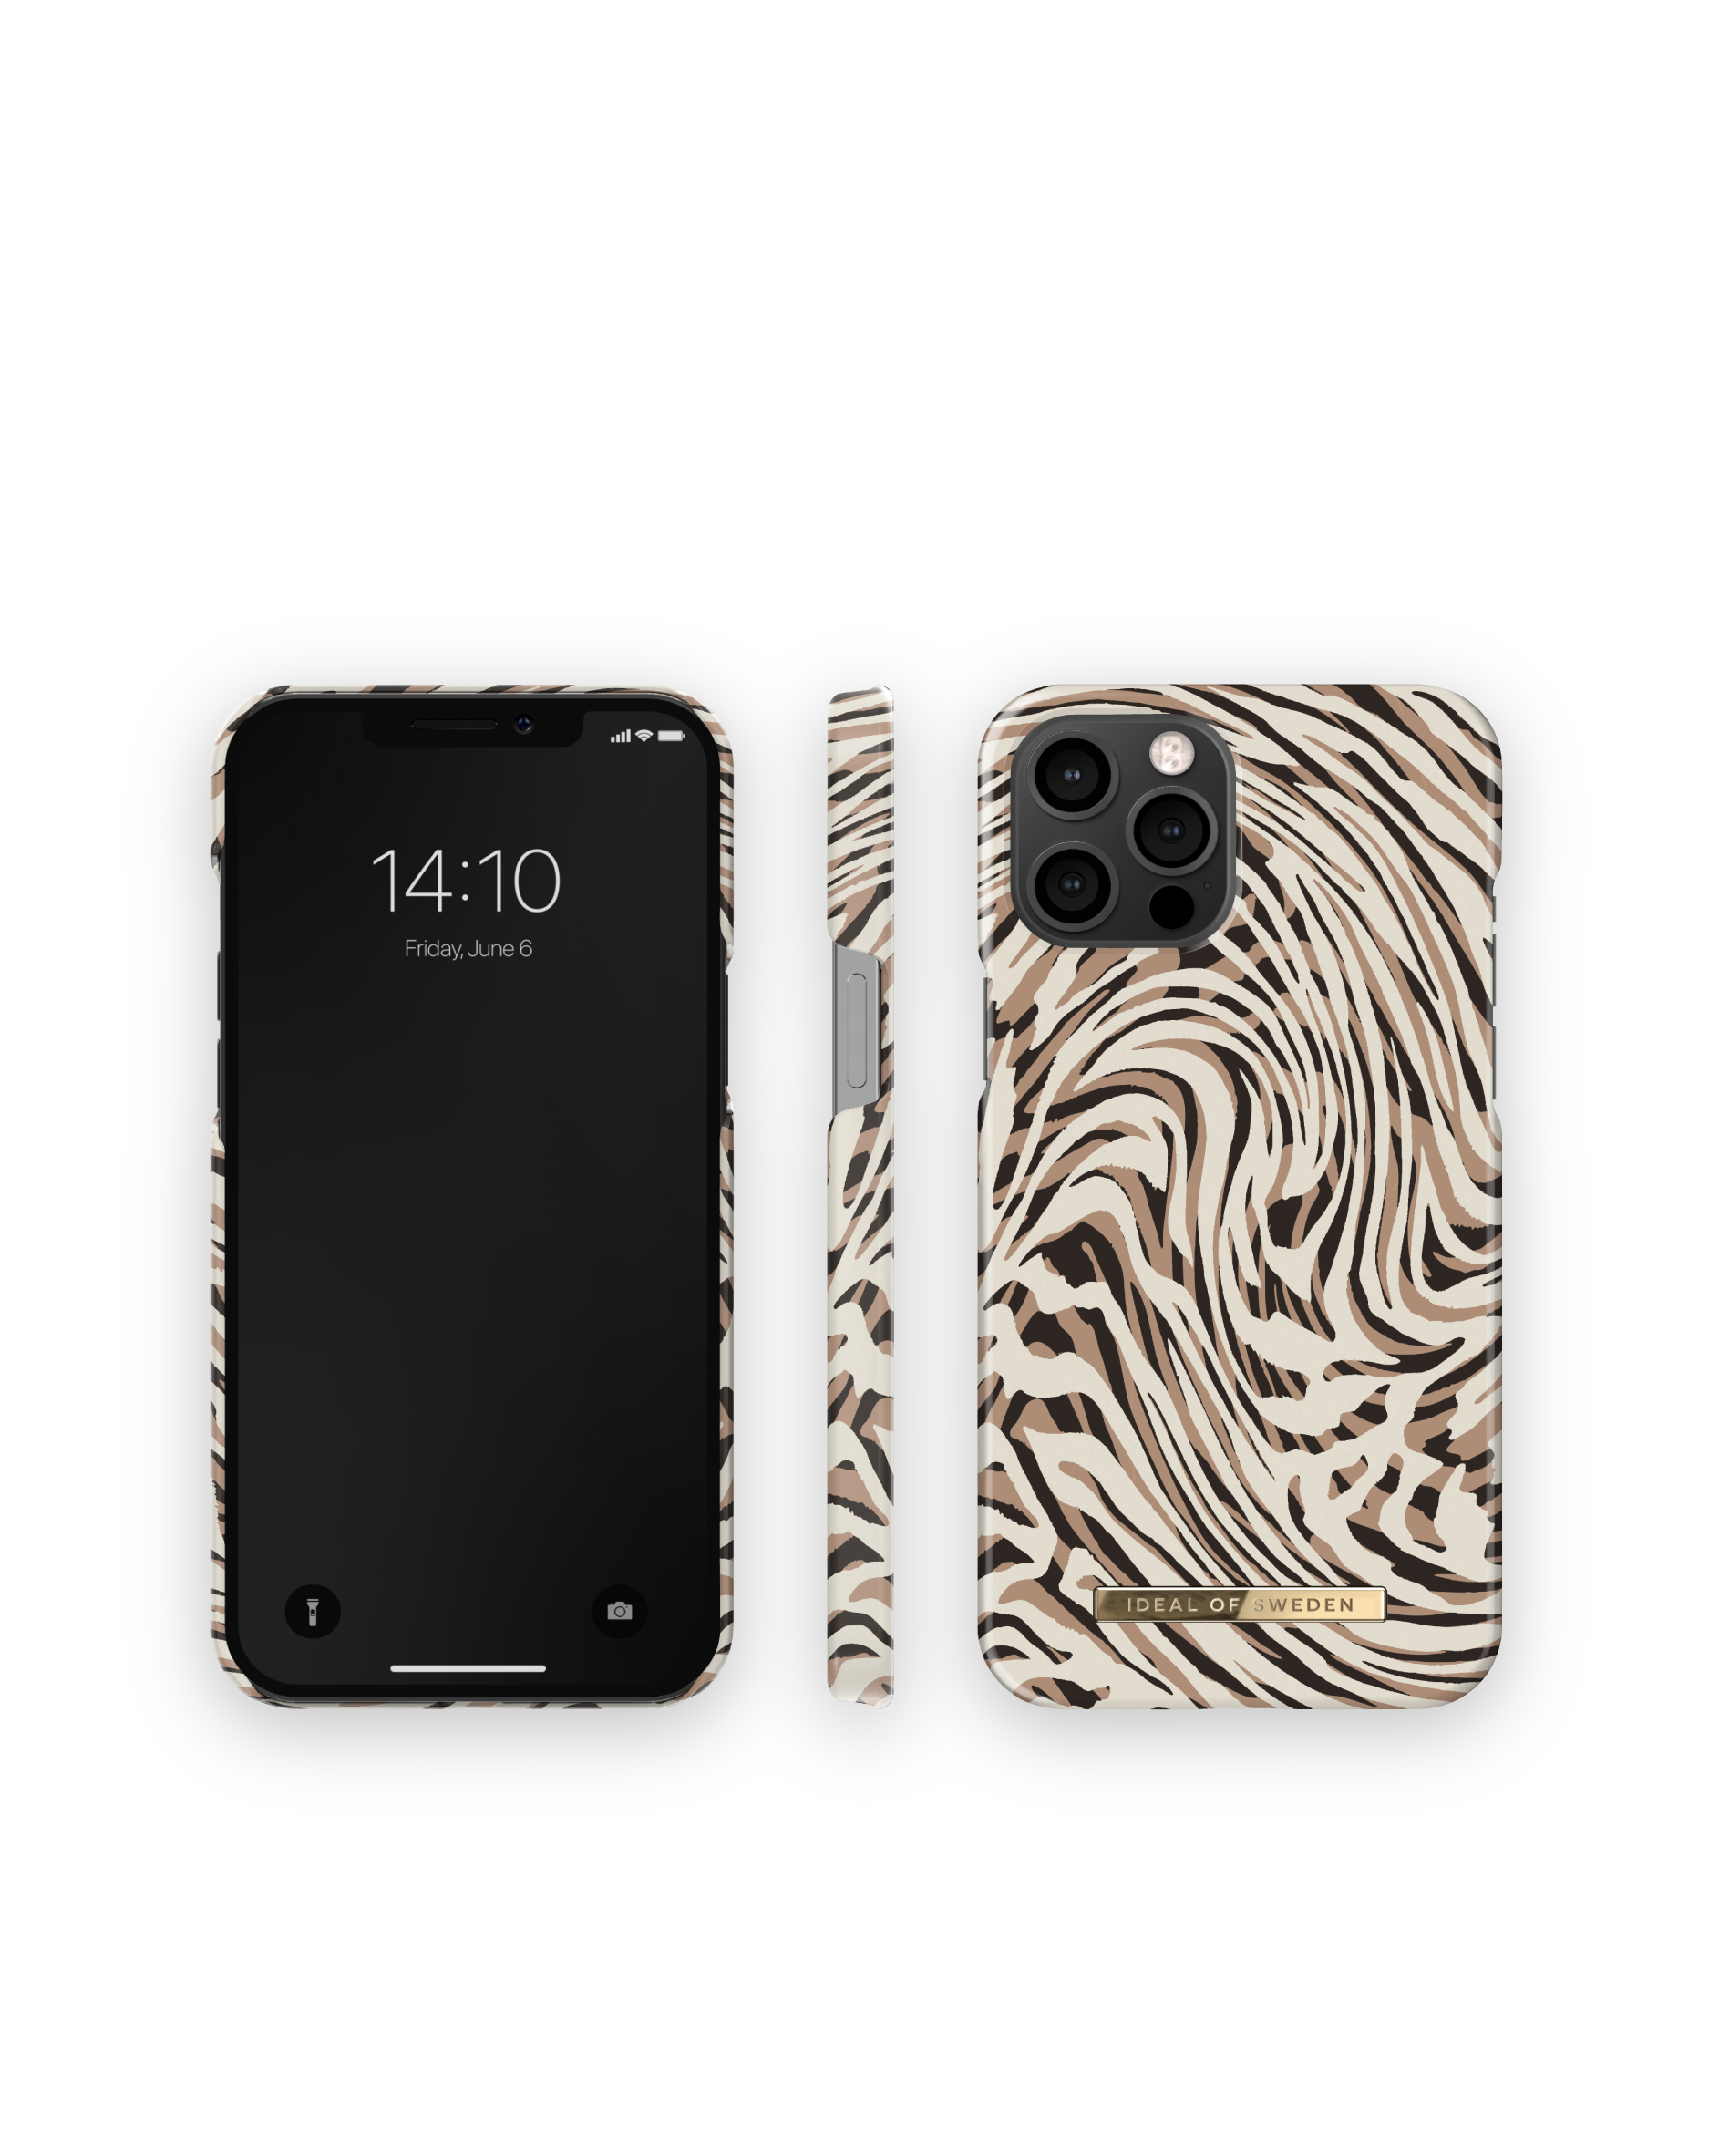 SWEDEN Zebra Pro iPhone IDFCSS22-I2067-392, Hypnotic Apple, 12 IDEAL OF Max, Backcover,